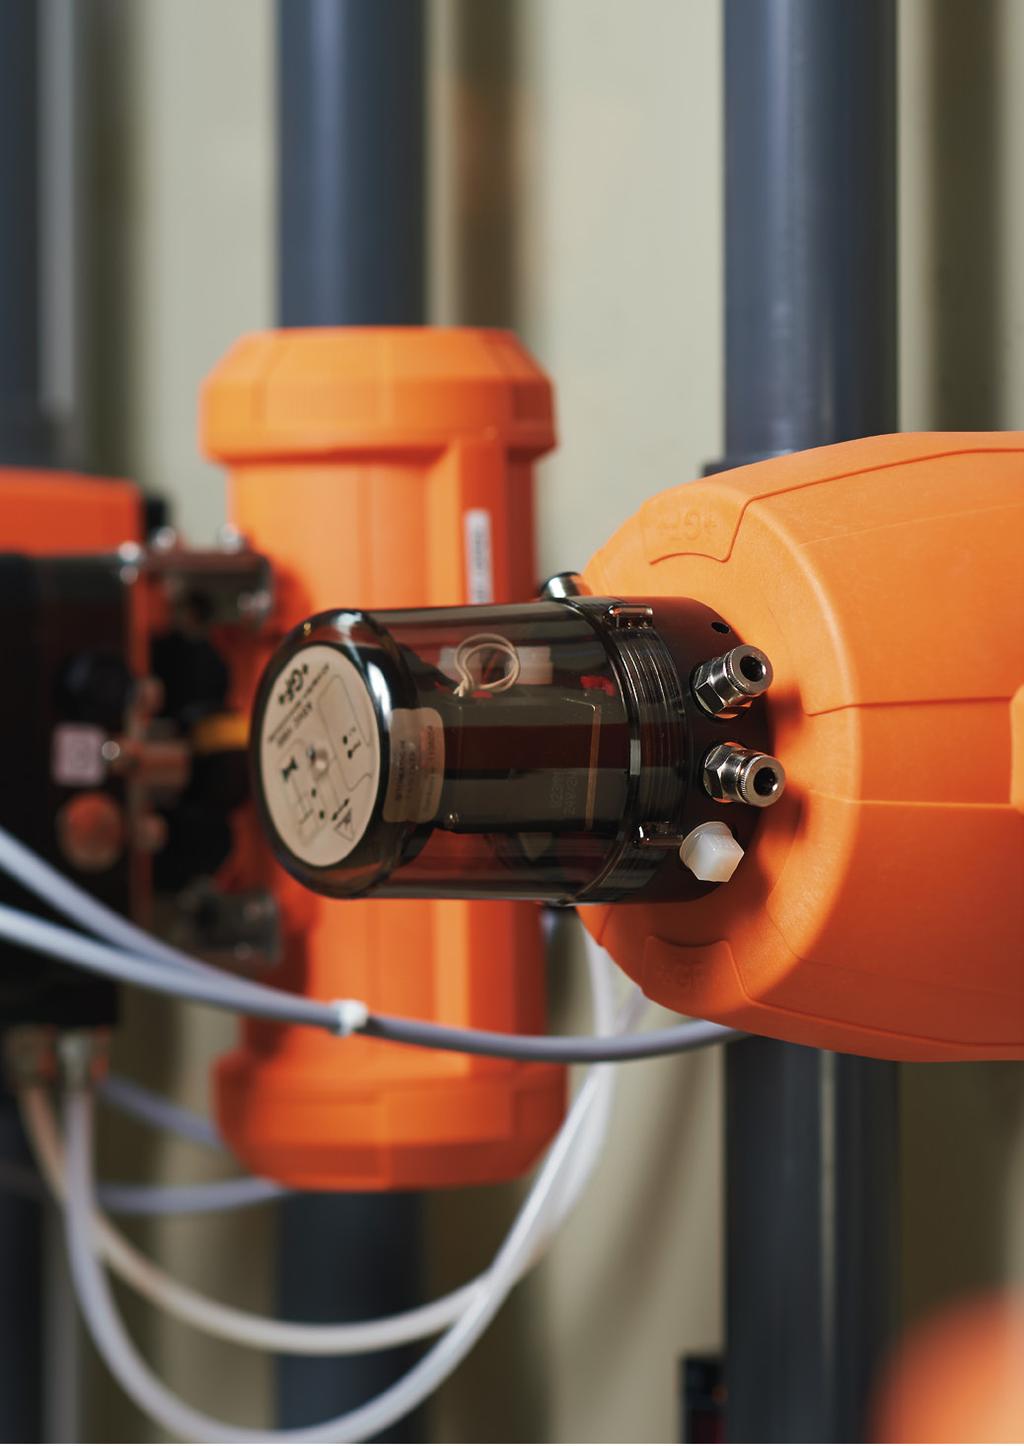 Actuation Reliable actuation with configuration flexibility With our modular set-up, valves and actuators can be combined flexibly and additional functionalities, like positioners or monitoring